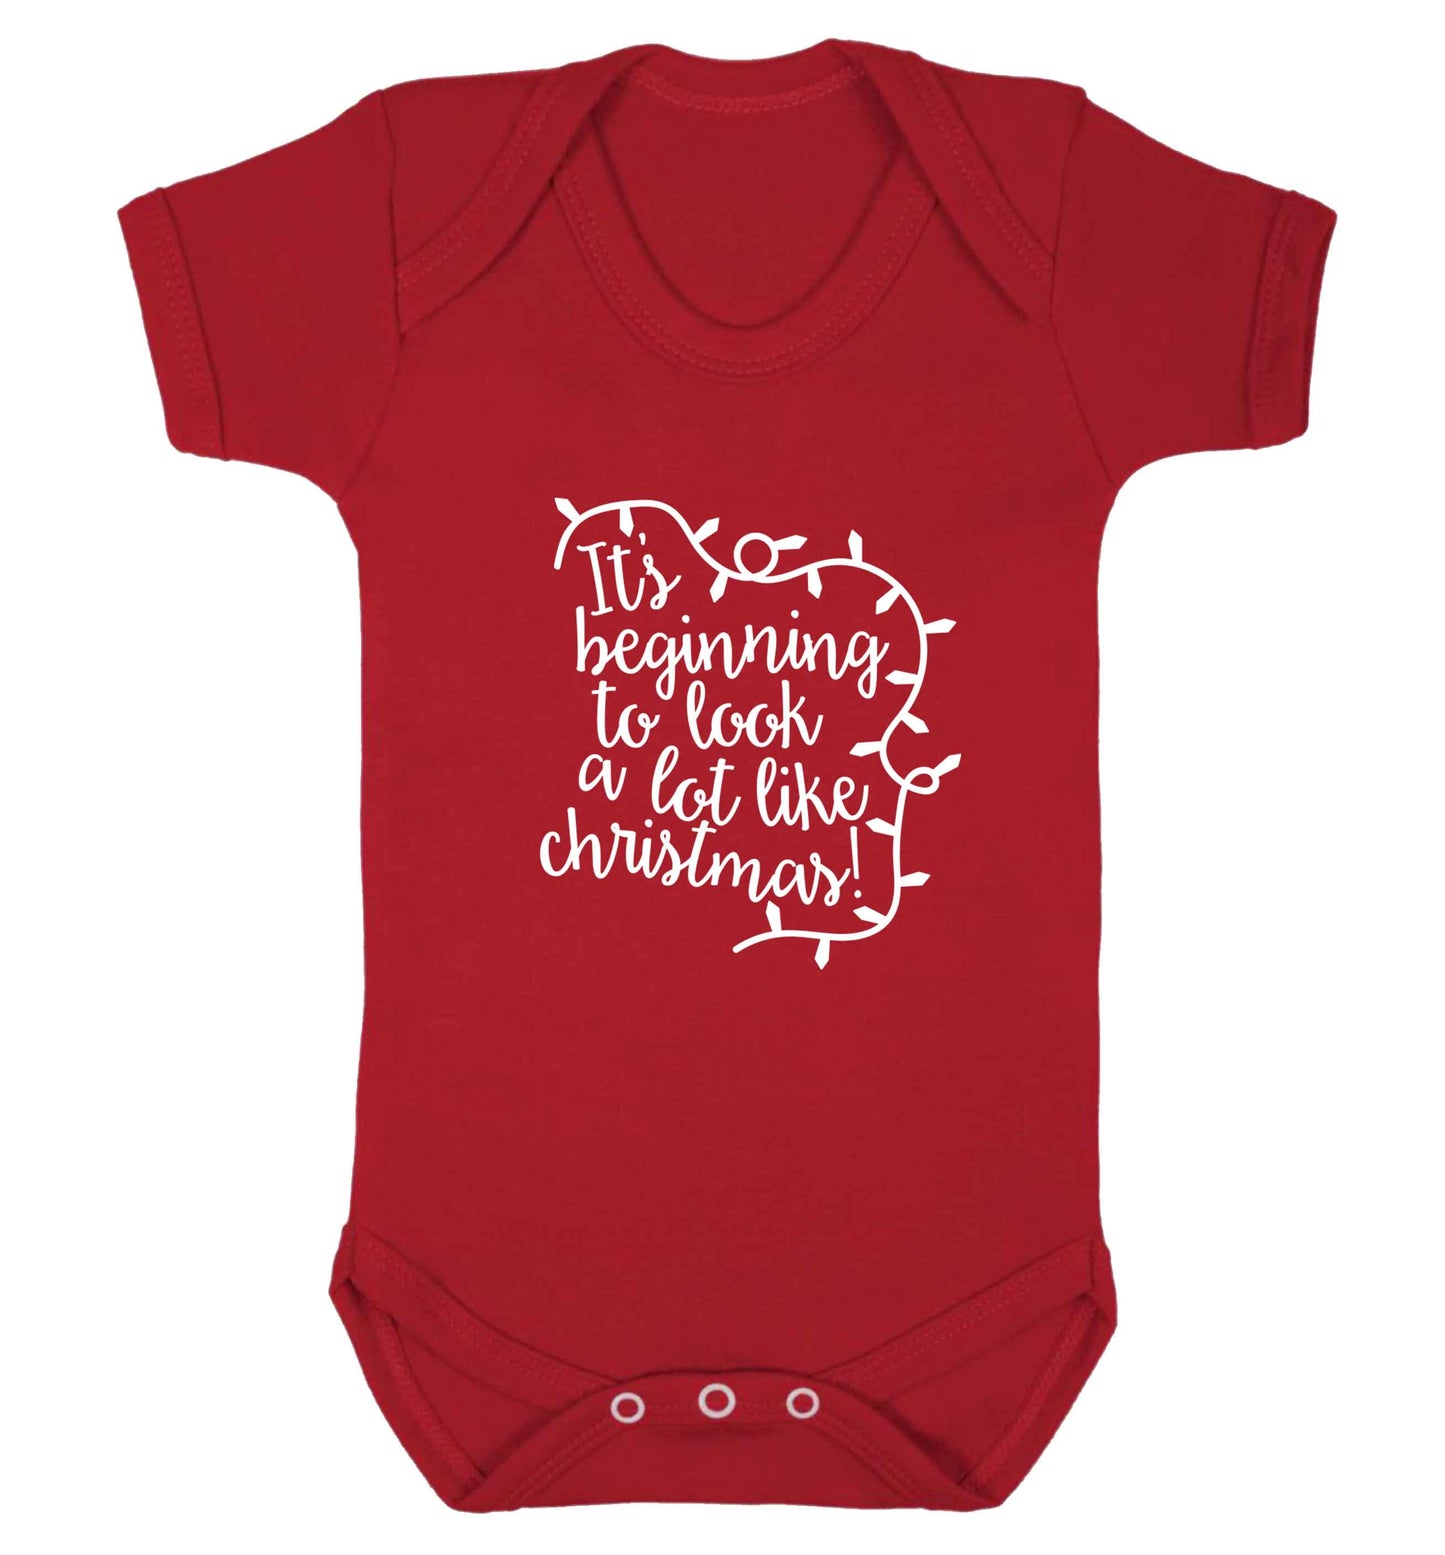 It's beginning to look a lot like Christmas baby vest red 18-24 months